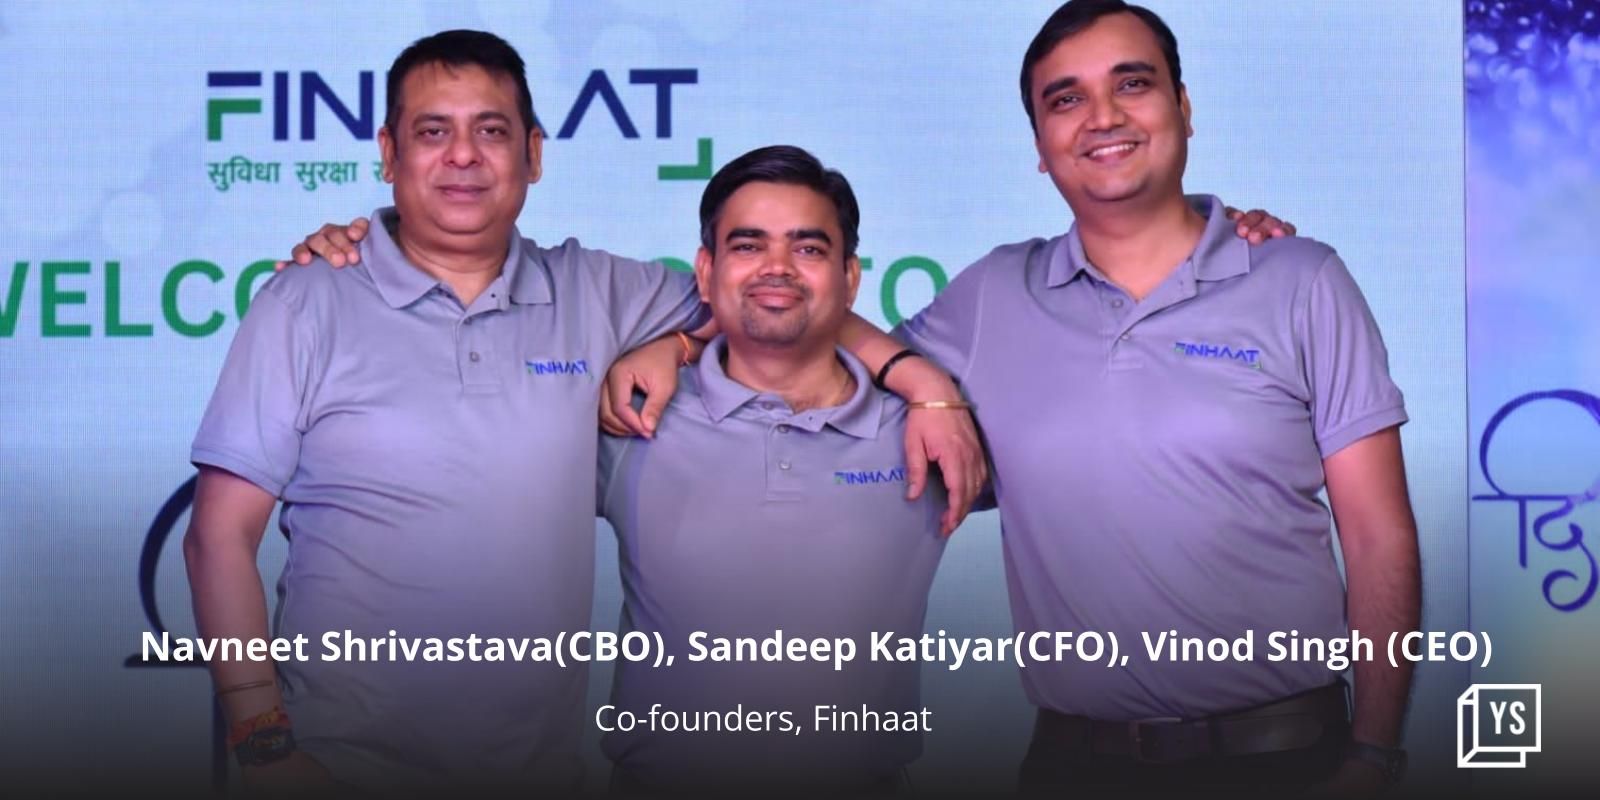 Insuring rural Indians, Finhaat aims to make financial services easily accessible